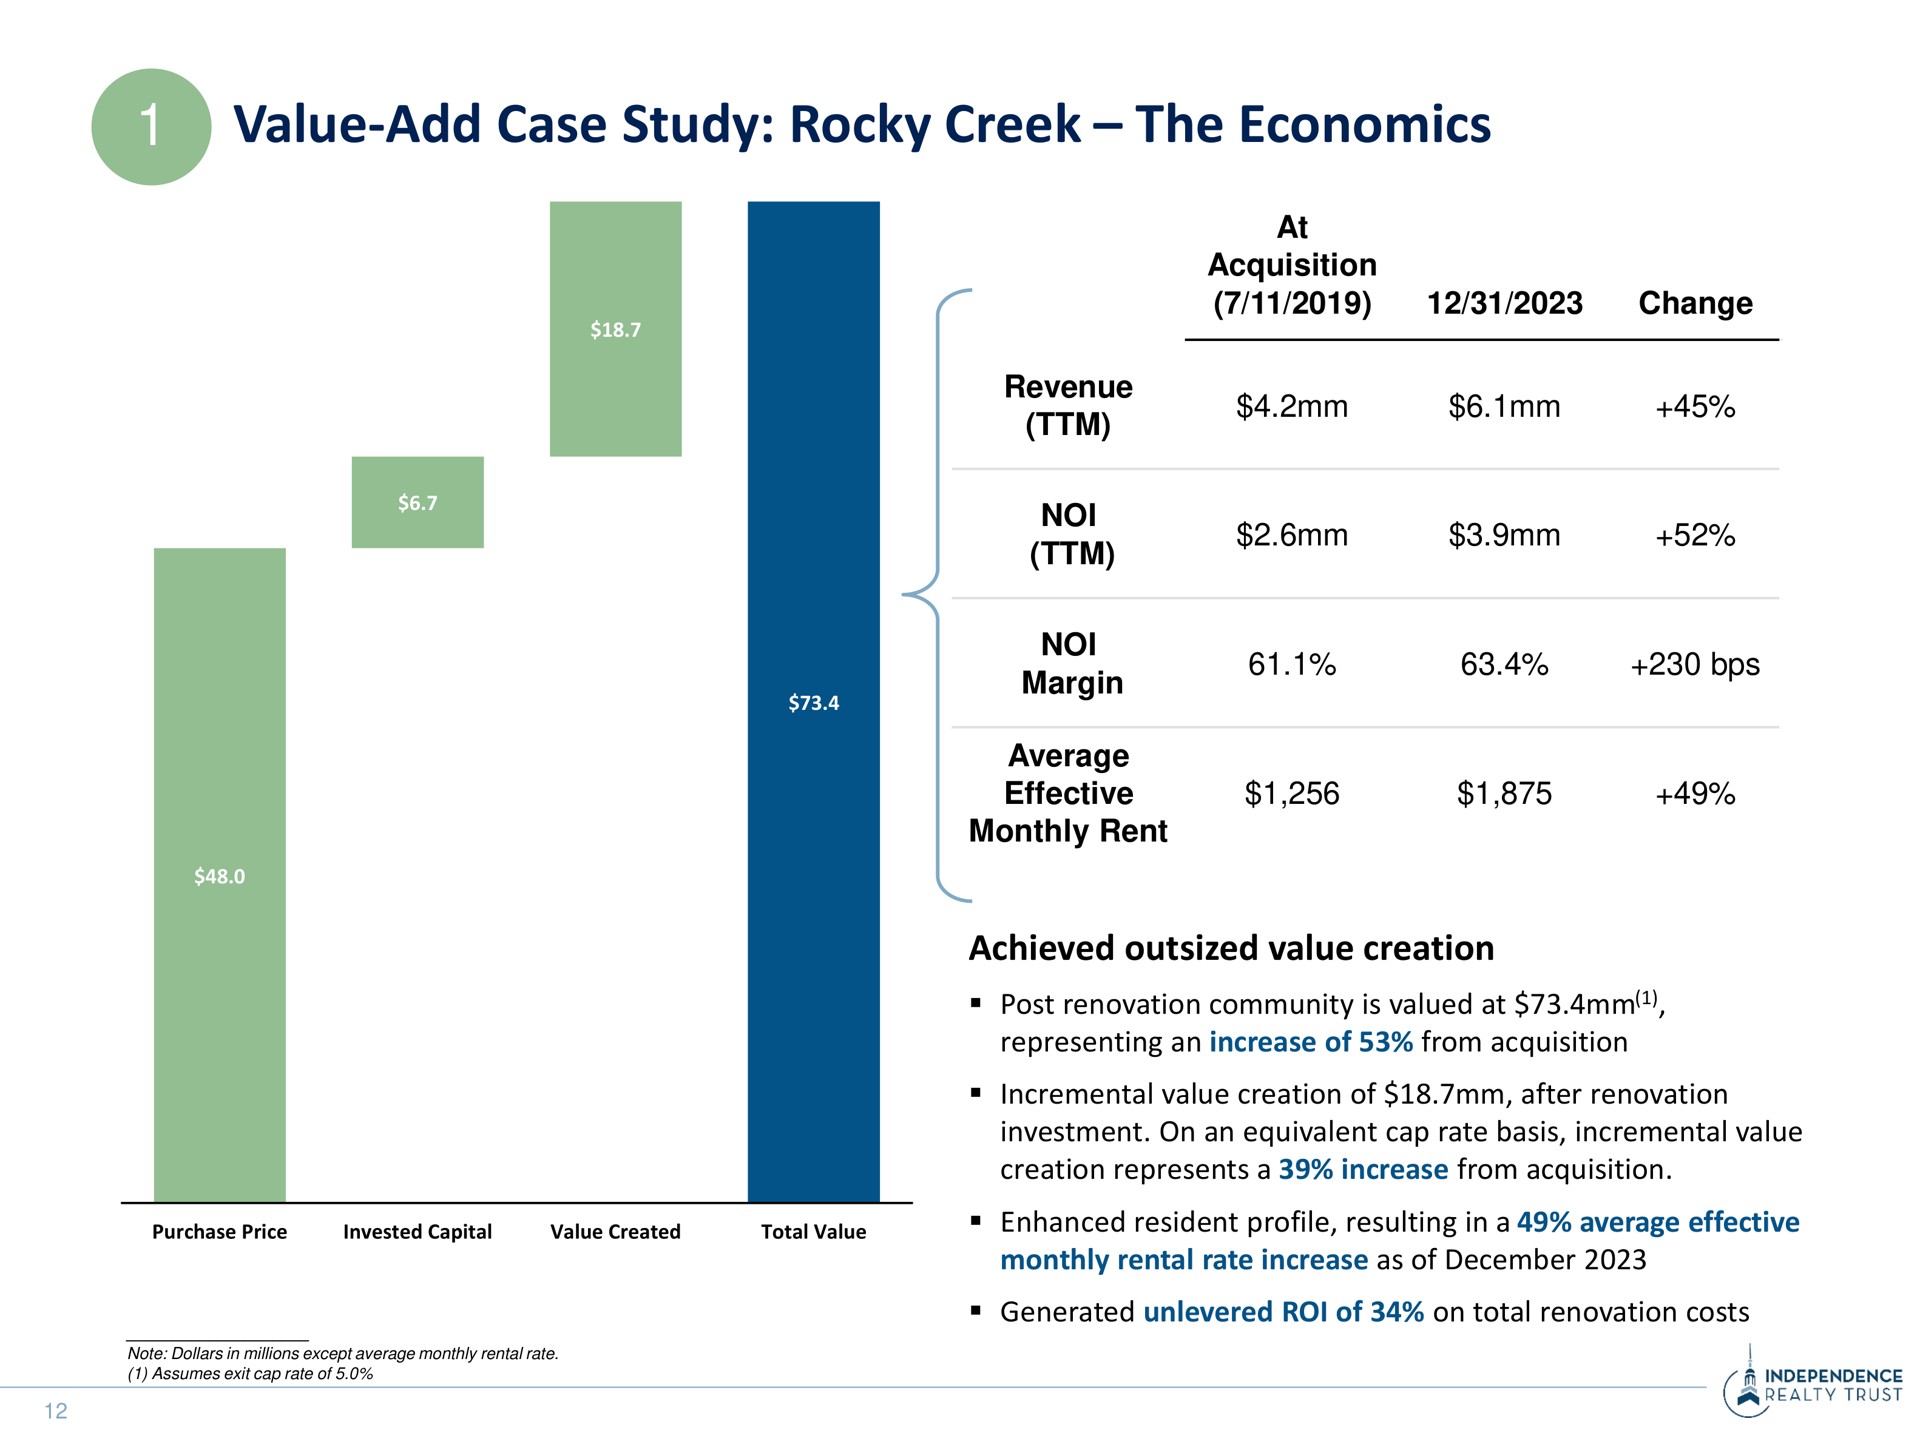 value add case study rocky creek the economics achieved outsized value creation | Independence Realty Trust